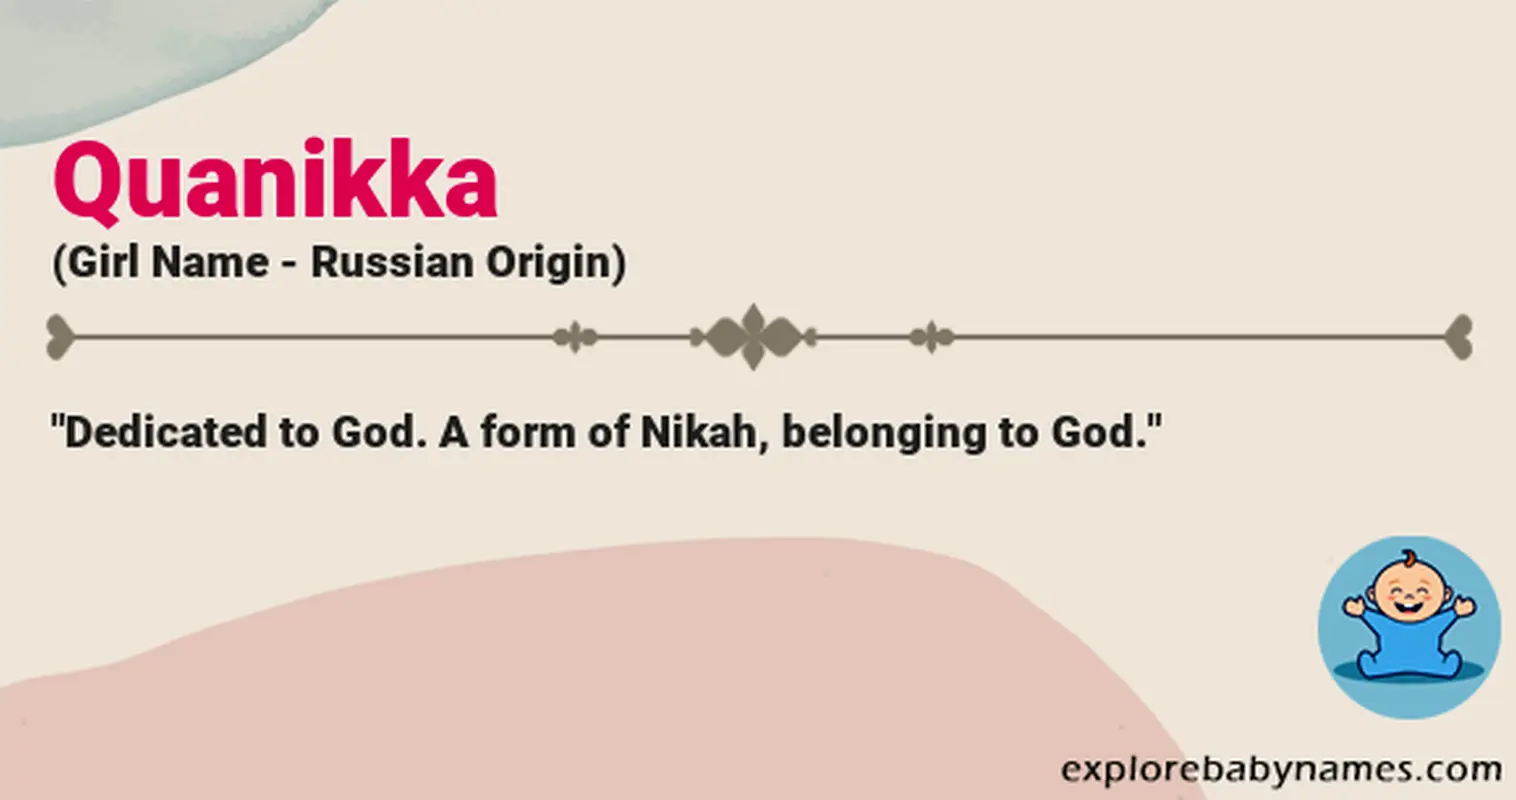 Meaning of Quanikka